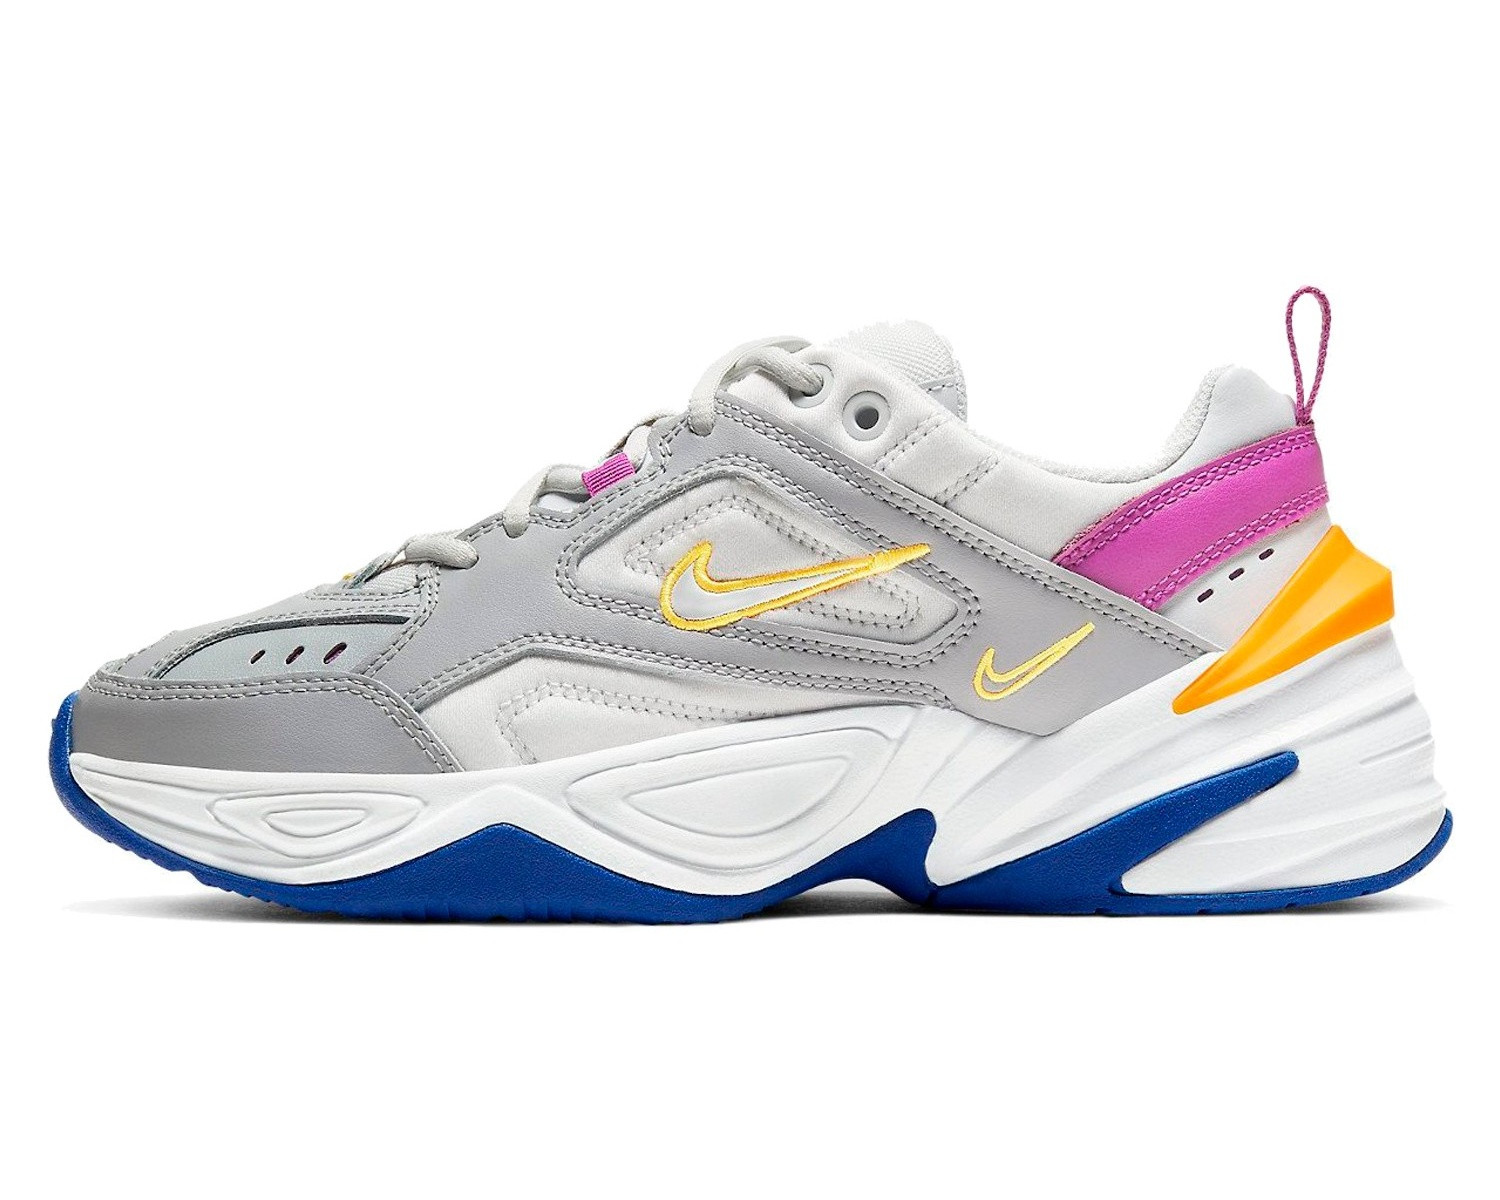 Nike Womens M2K Tekno Grey Dust Shoes AO3108 and stay tuned for more updated on Sneaker News - Ariss-euShops - 018